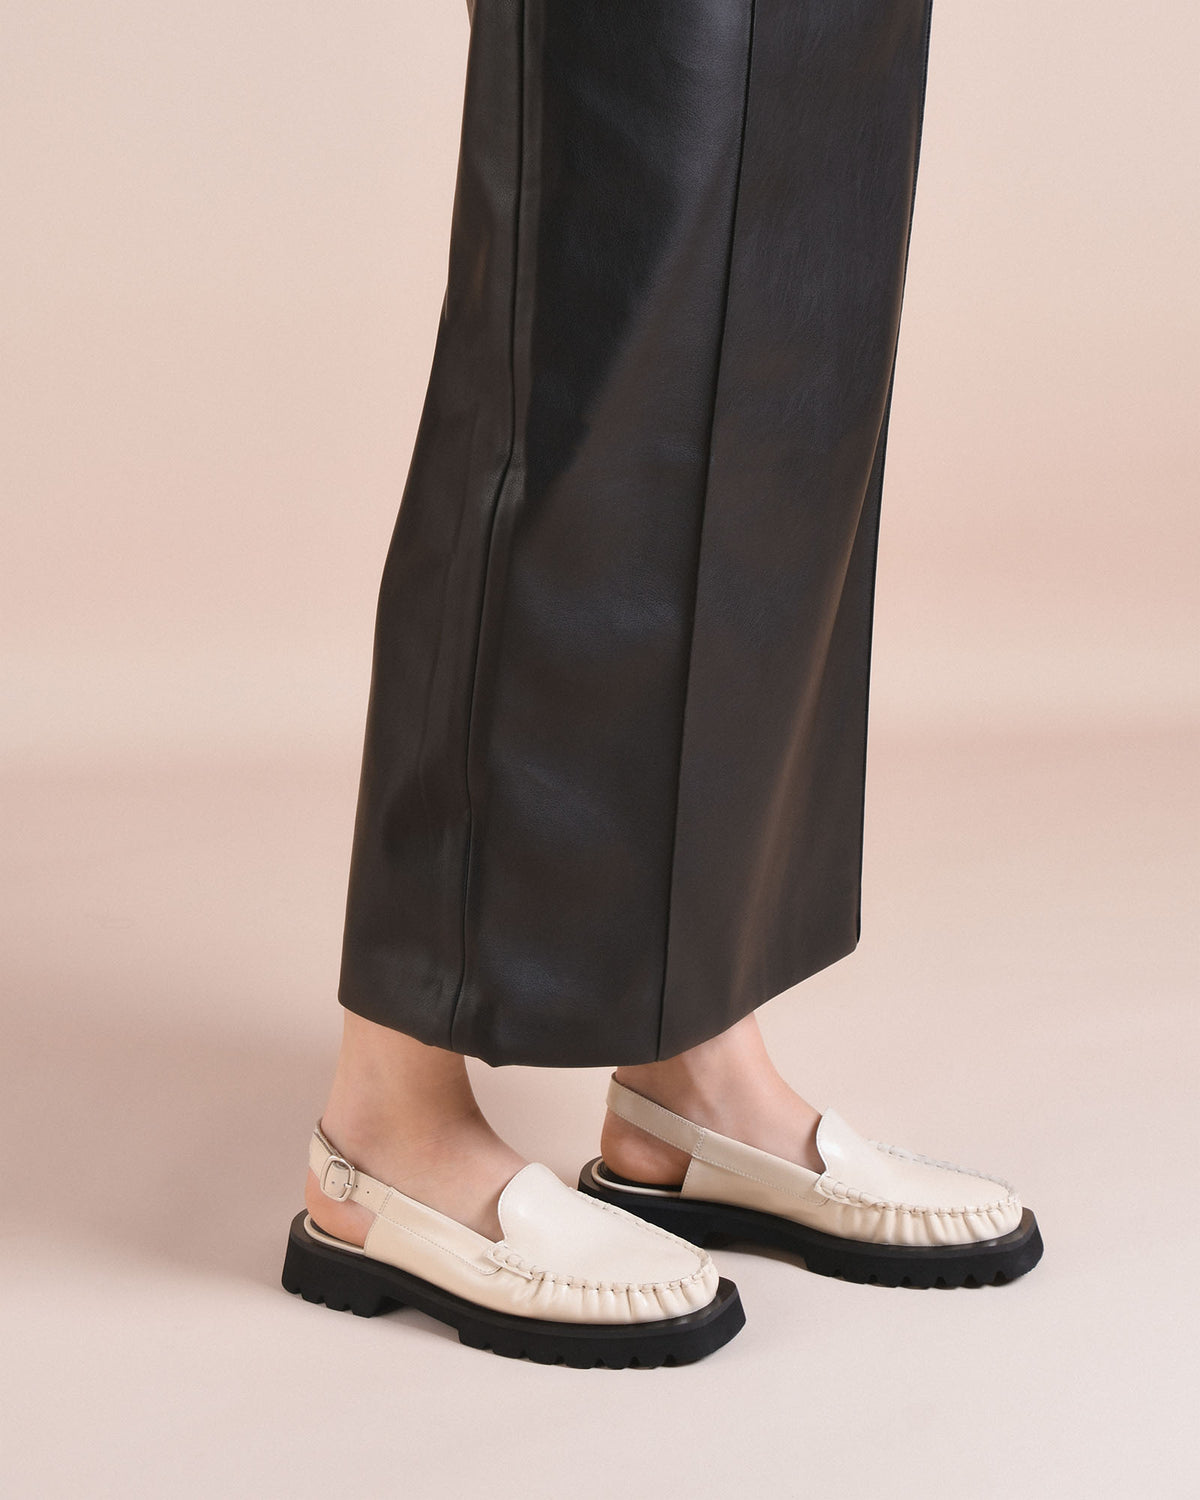 EMERSON LOAFERS OFF WHITE BOX LEATHER